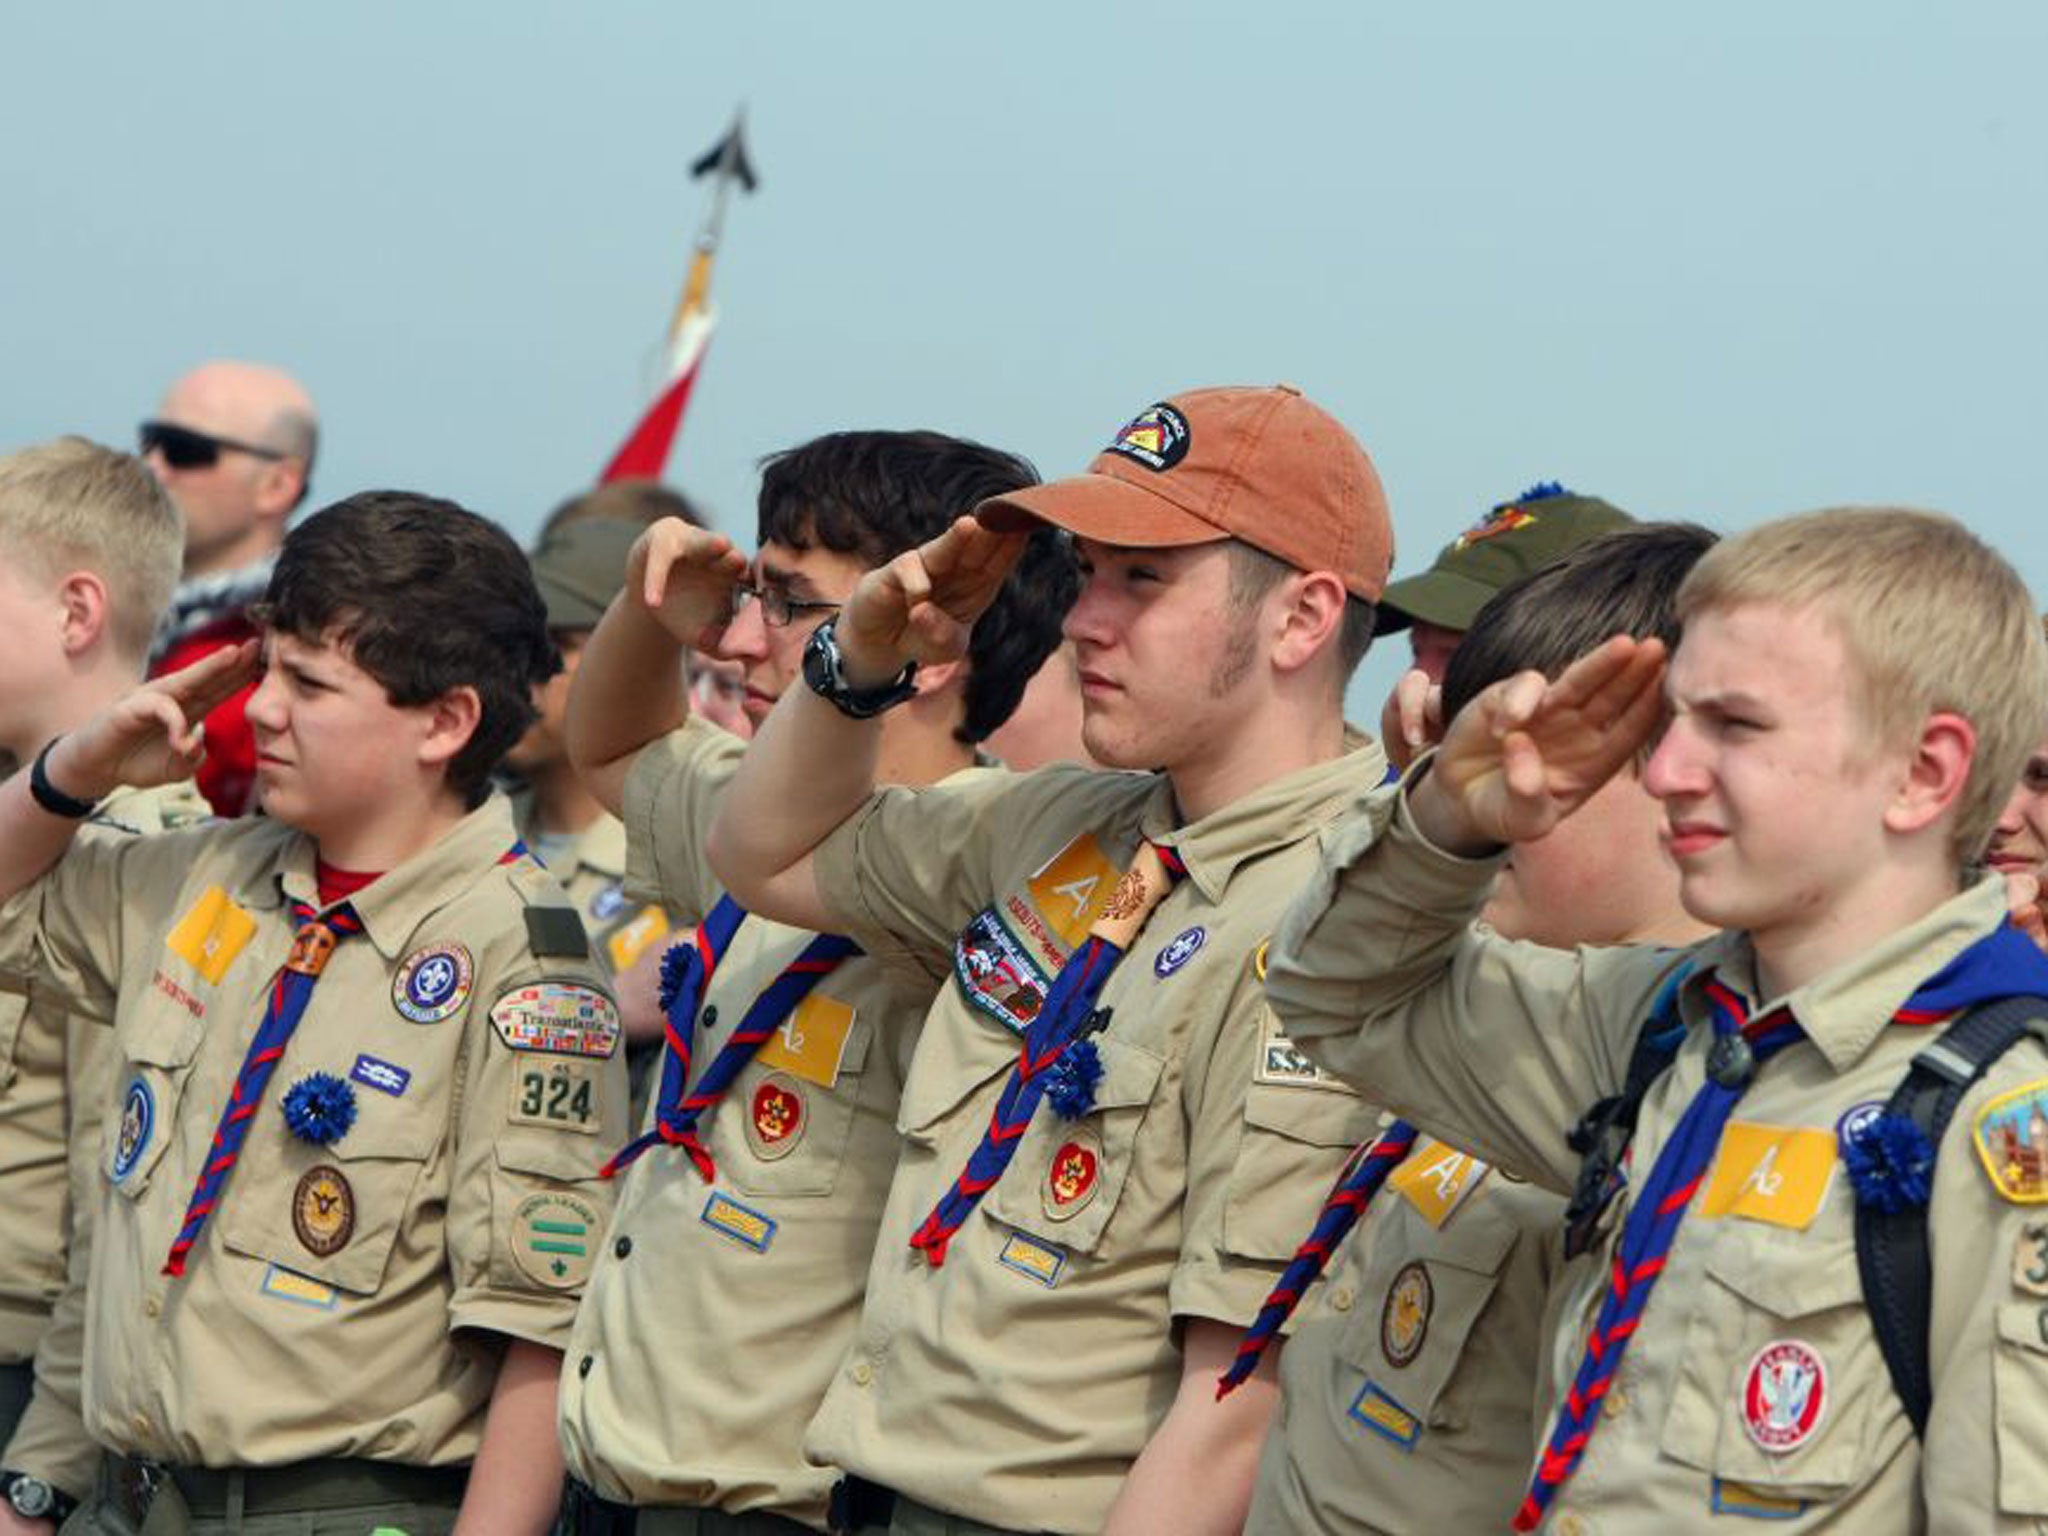 You might feel a sense of envy for The Boy Scouts of America, who now get to sit around playing video games rather than getting their hands dirty